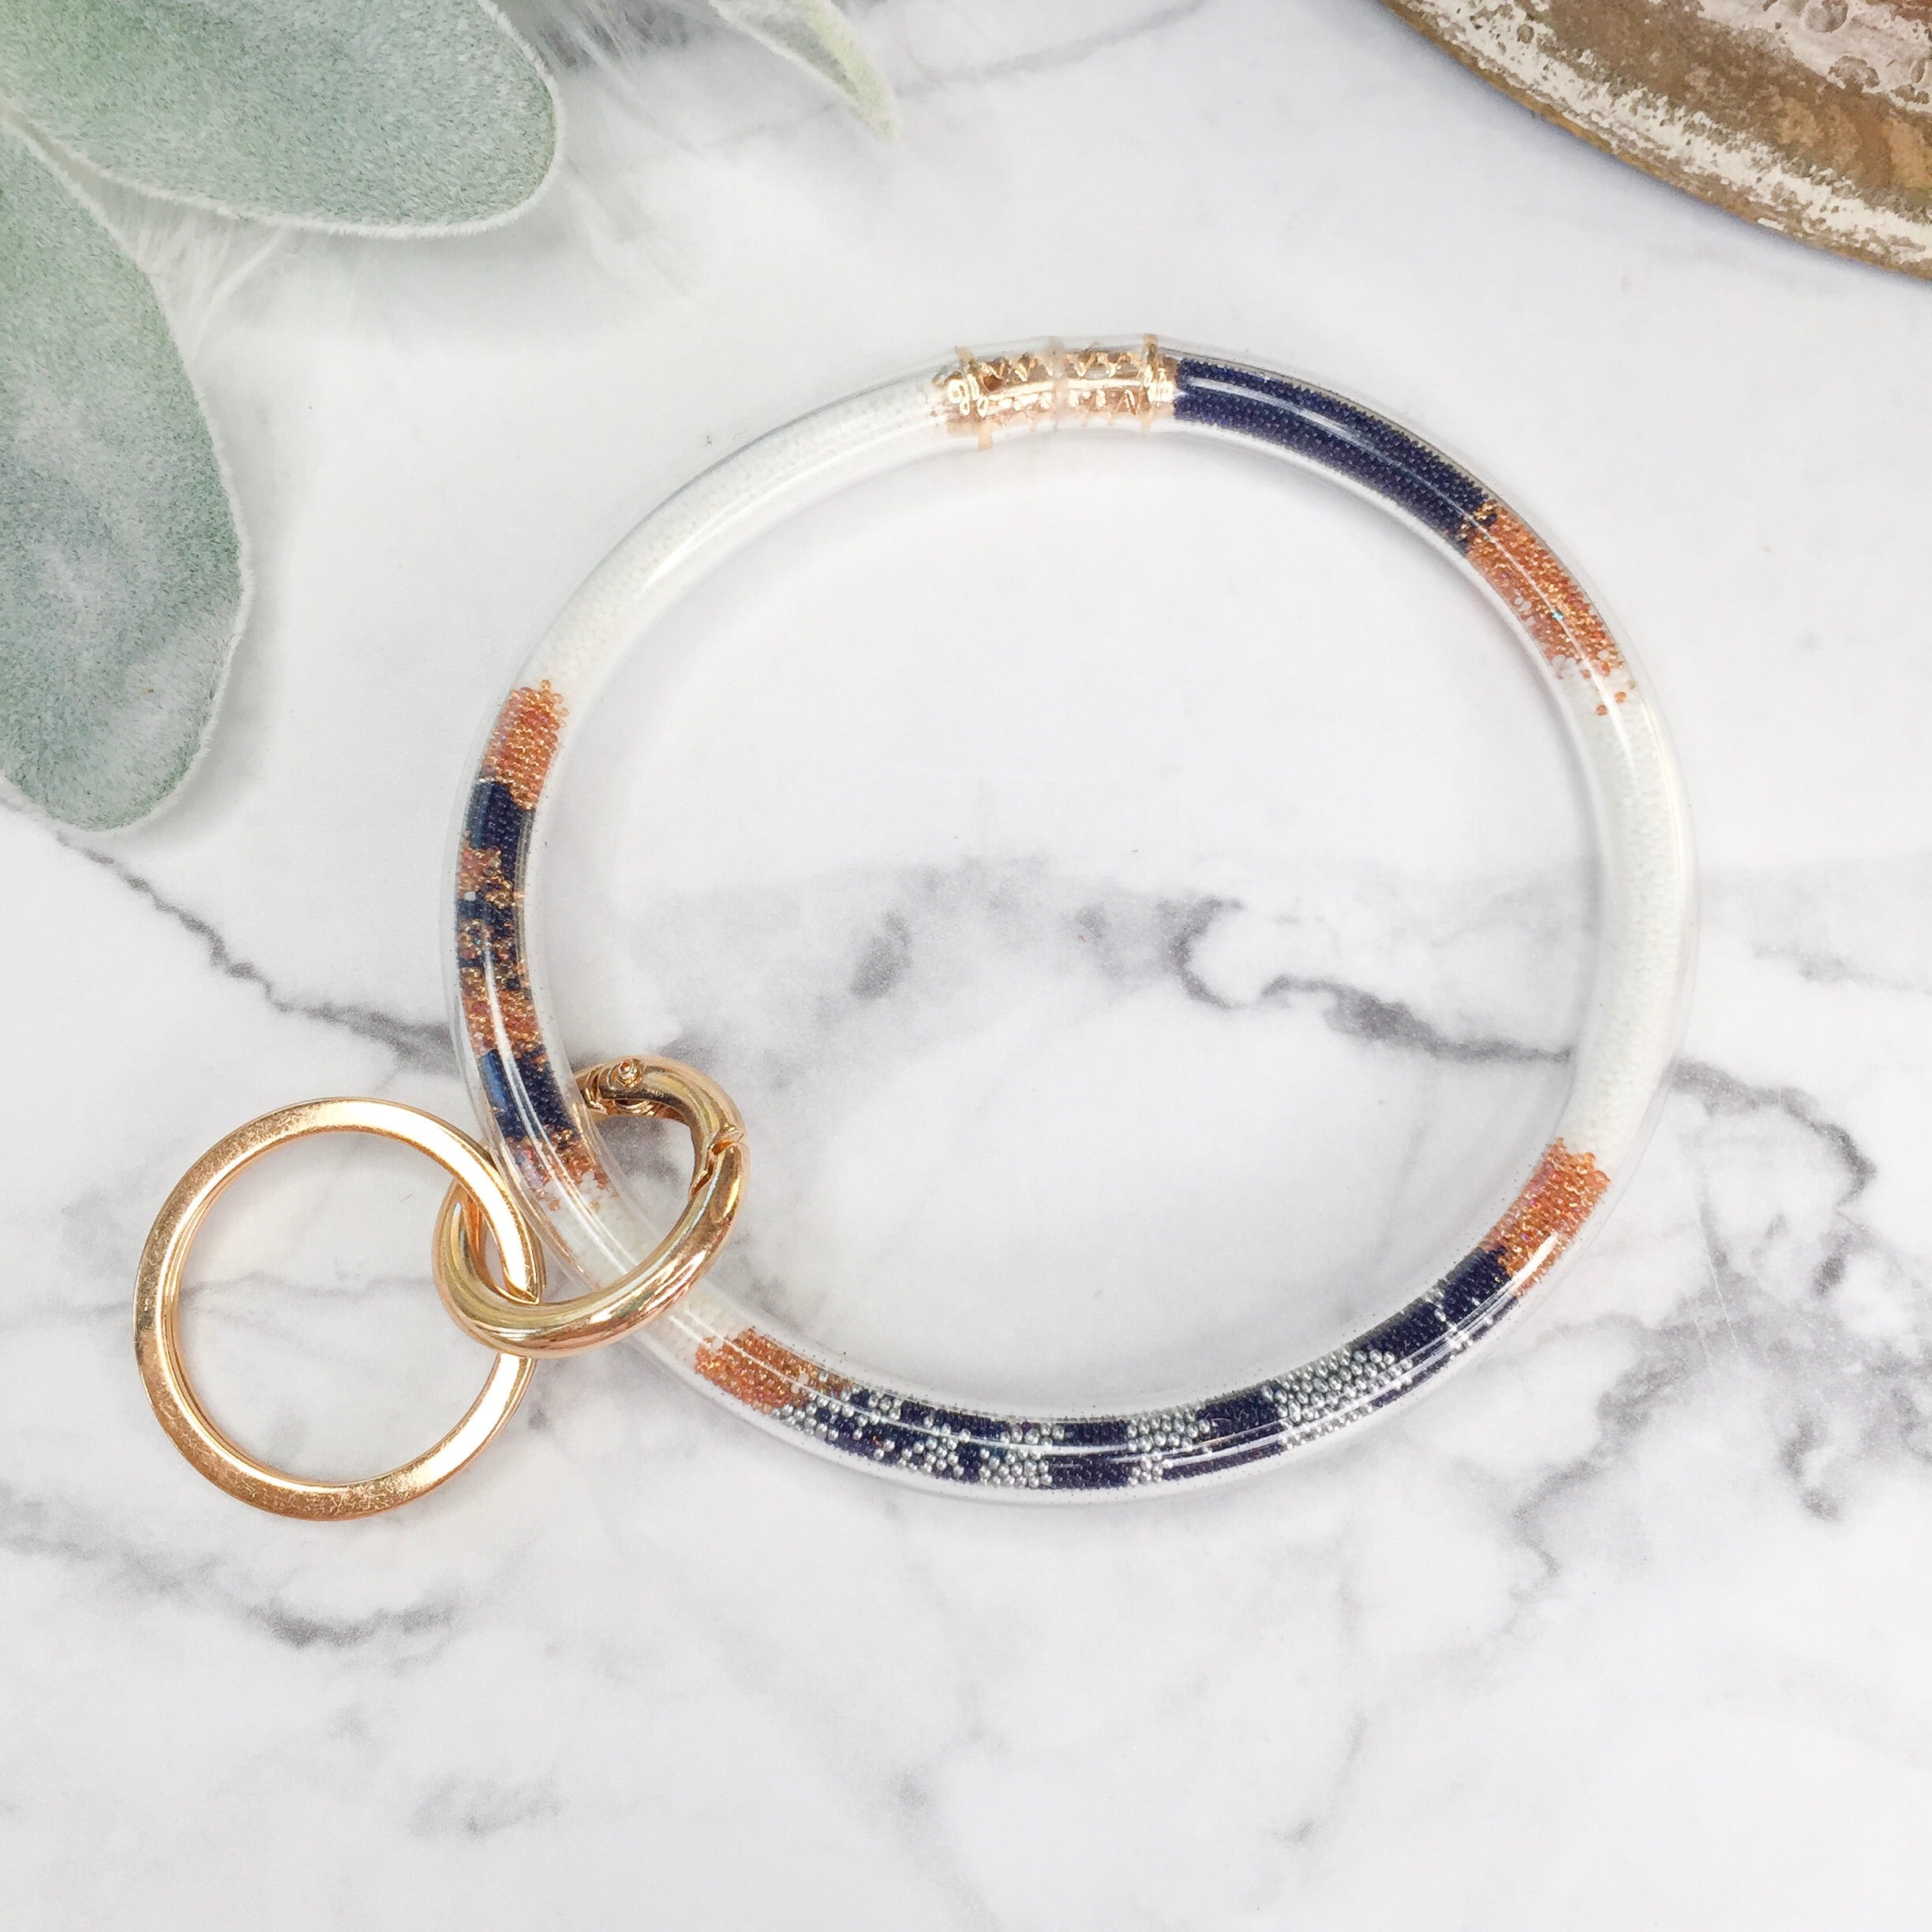 Clear O Bangle Key Ring with Micro Beads in White, Rose Gold, and Navy - Giddy Up Glamour Boutique